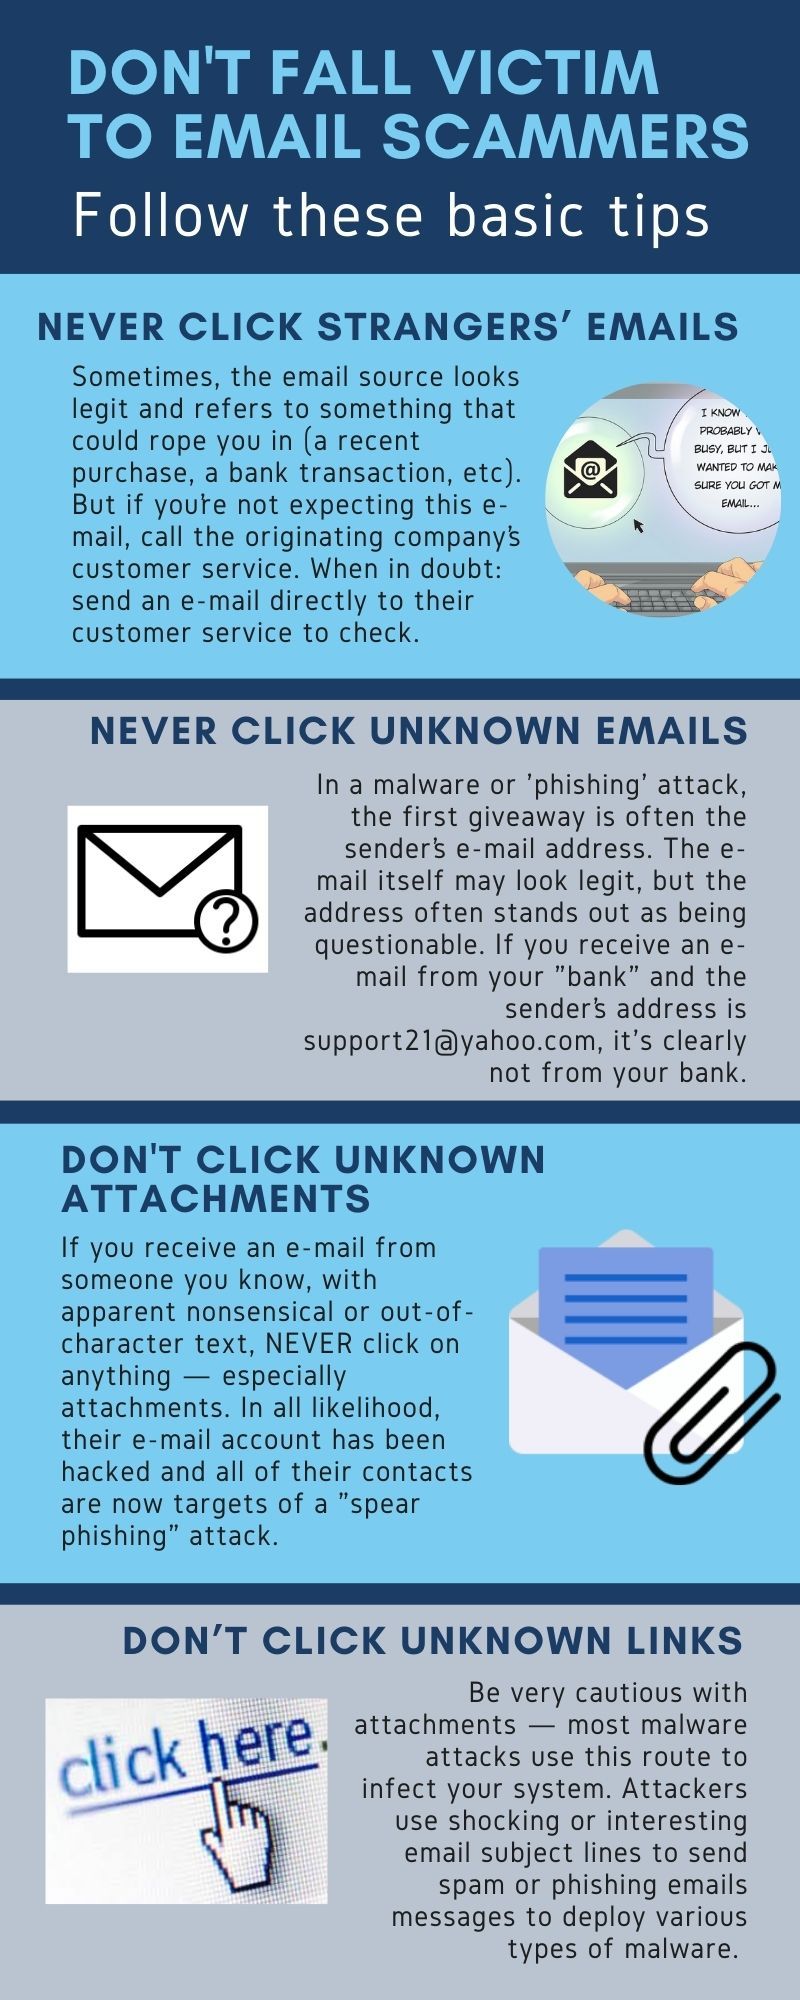 Email security tips